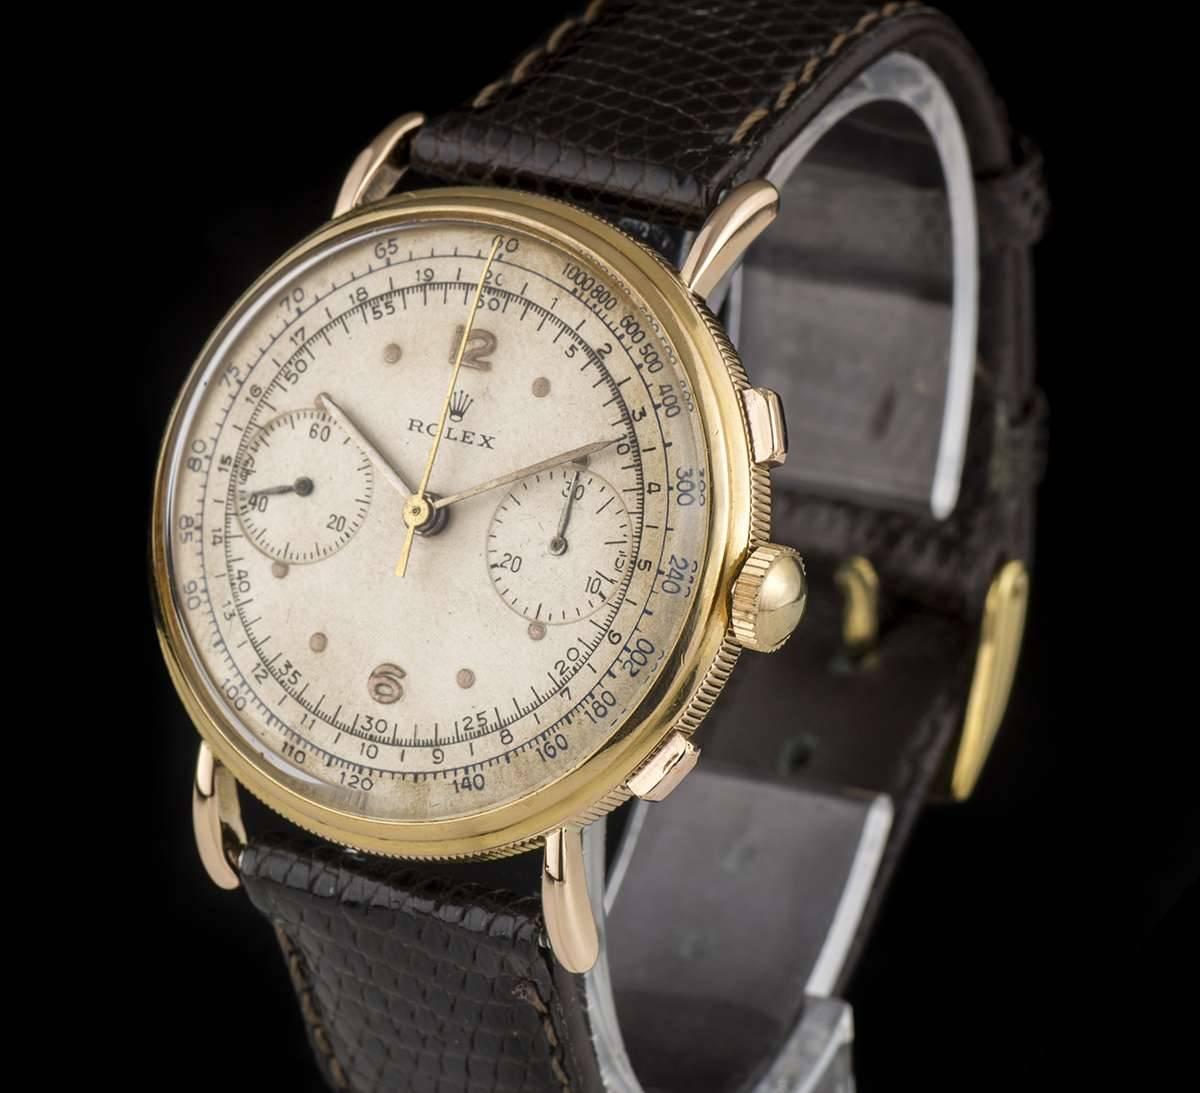 An 18k Yellow Gold Vintage Chronograph Gents Wristwatch, silver dial with applied roman numerals and applied arabic numbers at 6 and 12 0'clock, a fixed 18k yellow gold bezel, an 18k yellow gold "coin edge" case, a brand new brown leather